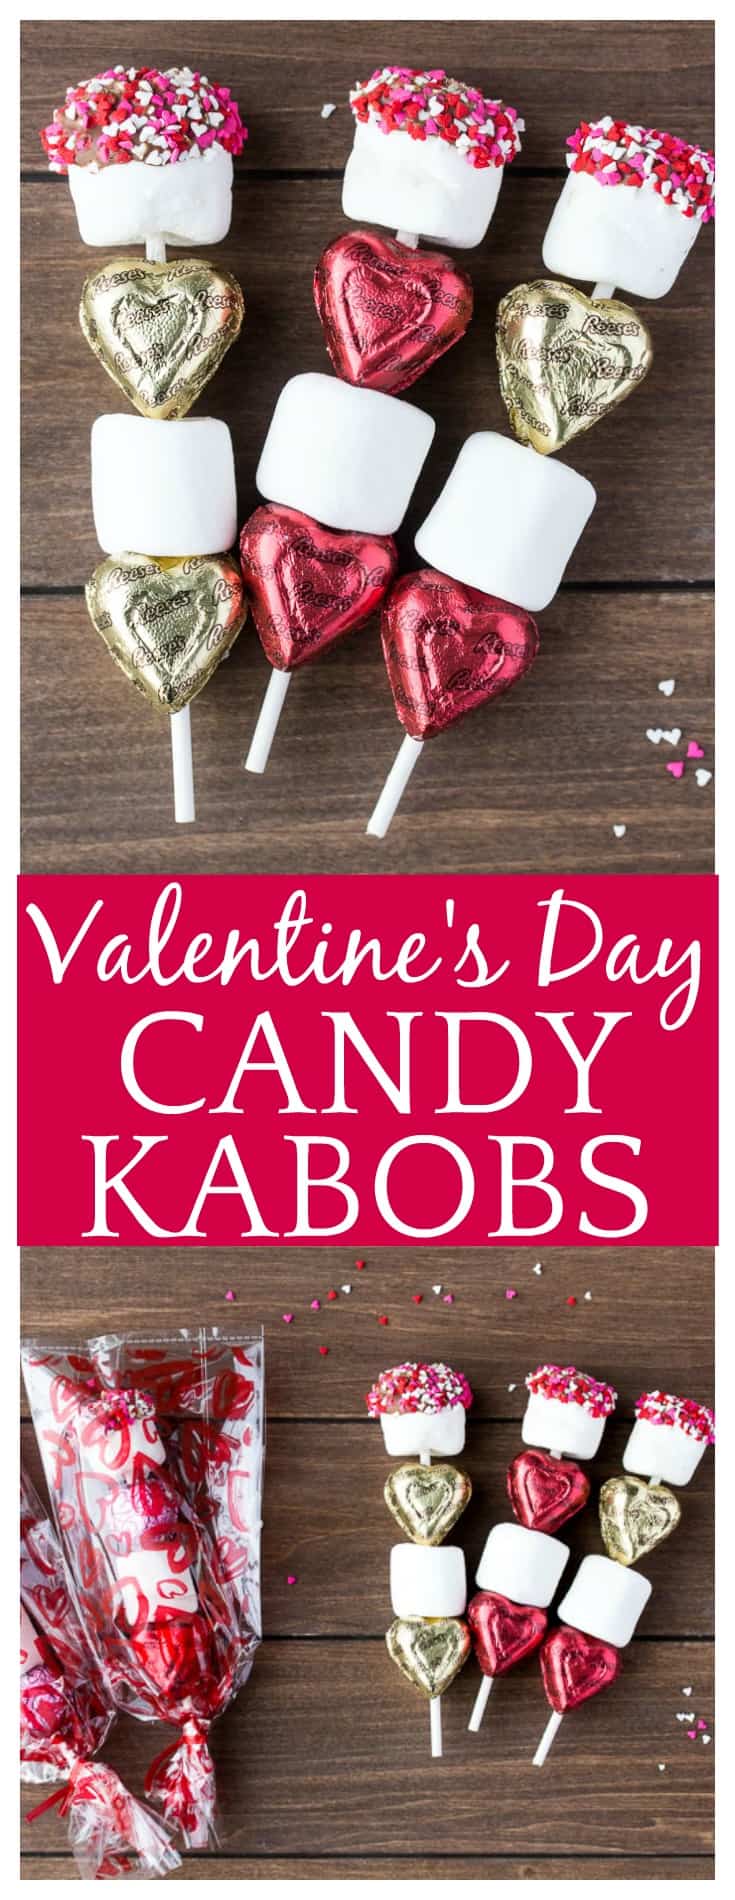 Valentine's Day Candy Kabobs - Delicious Little Bites